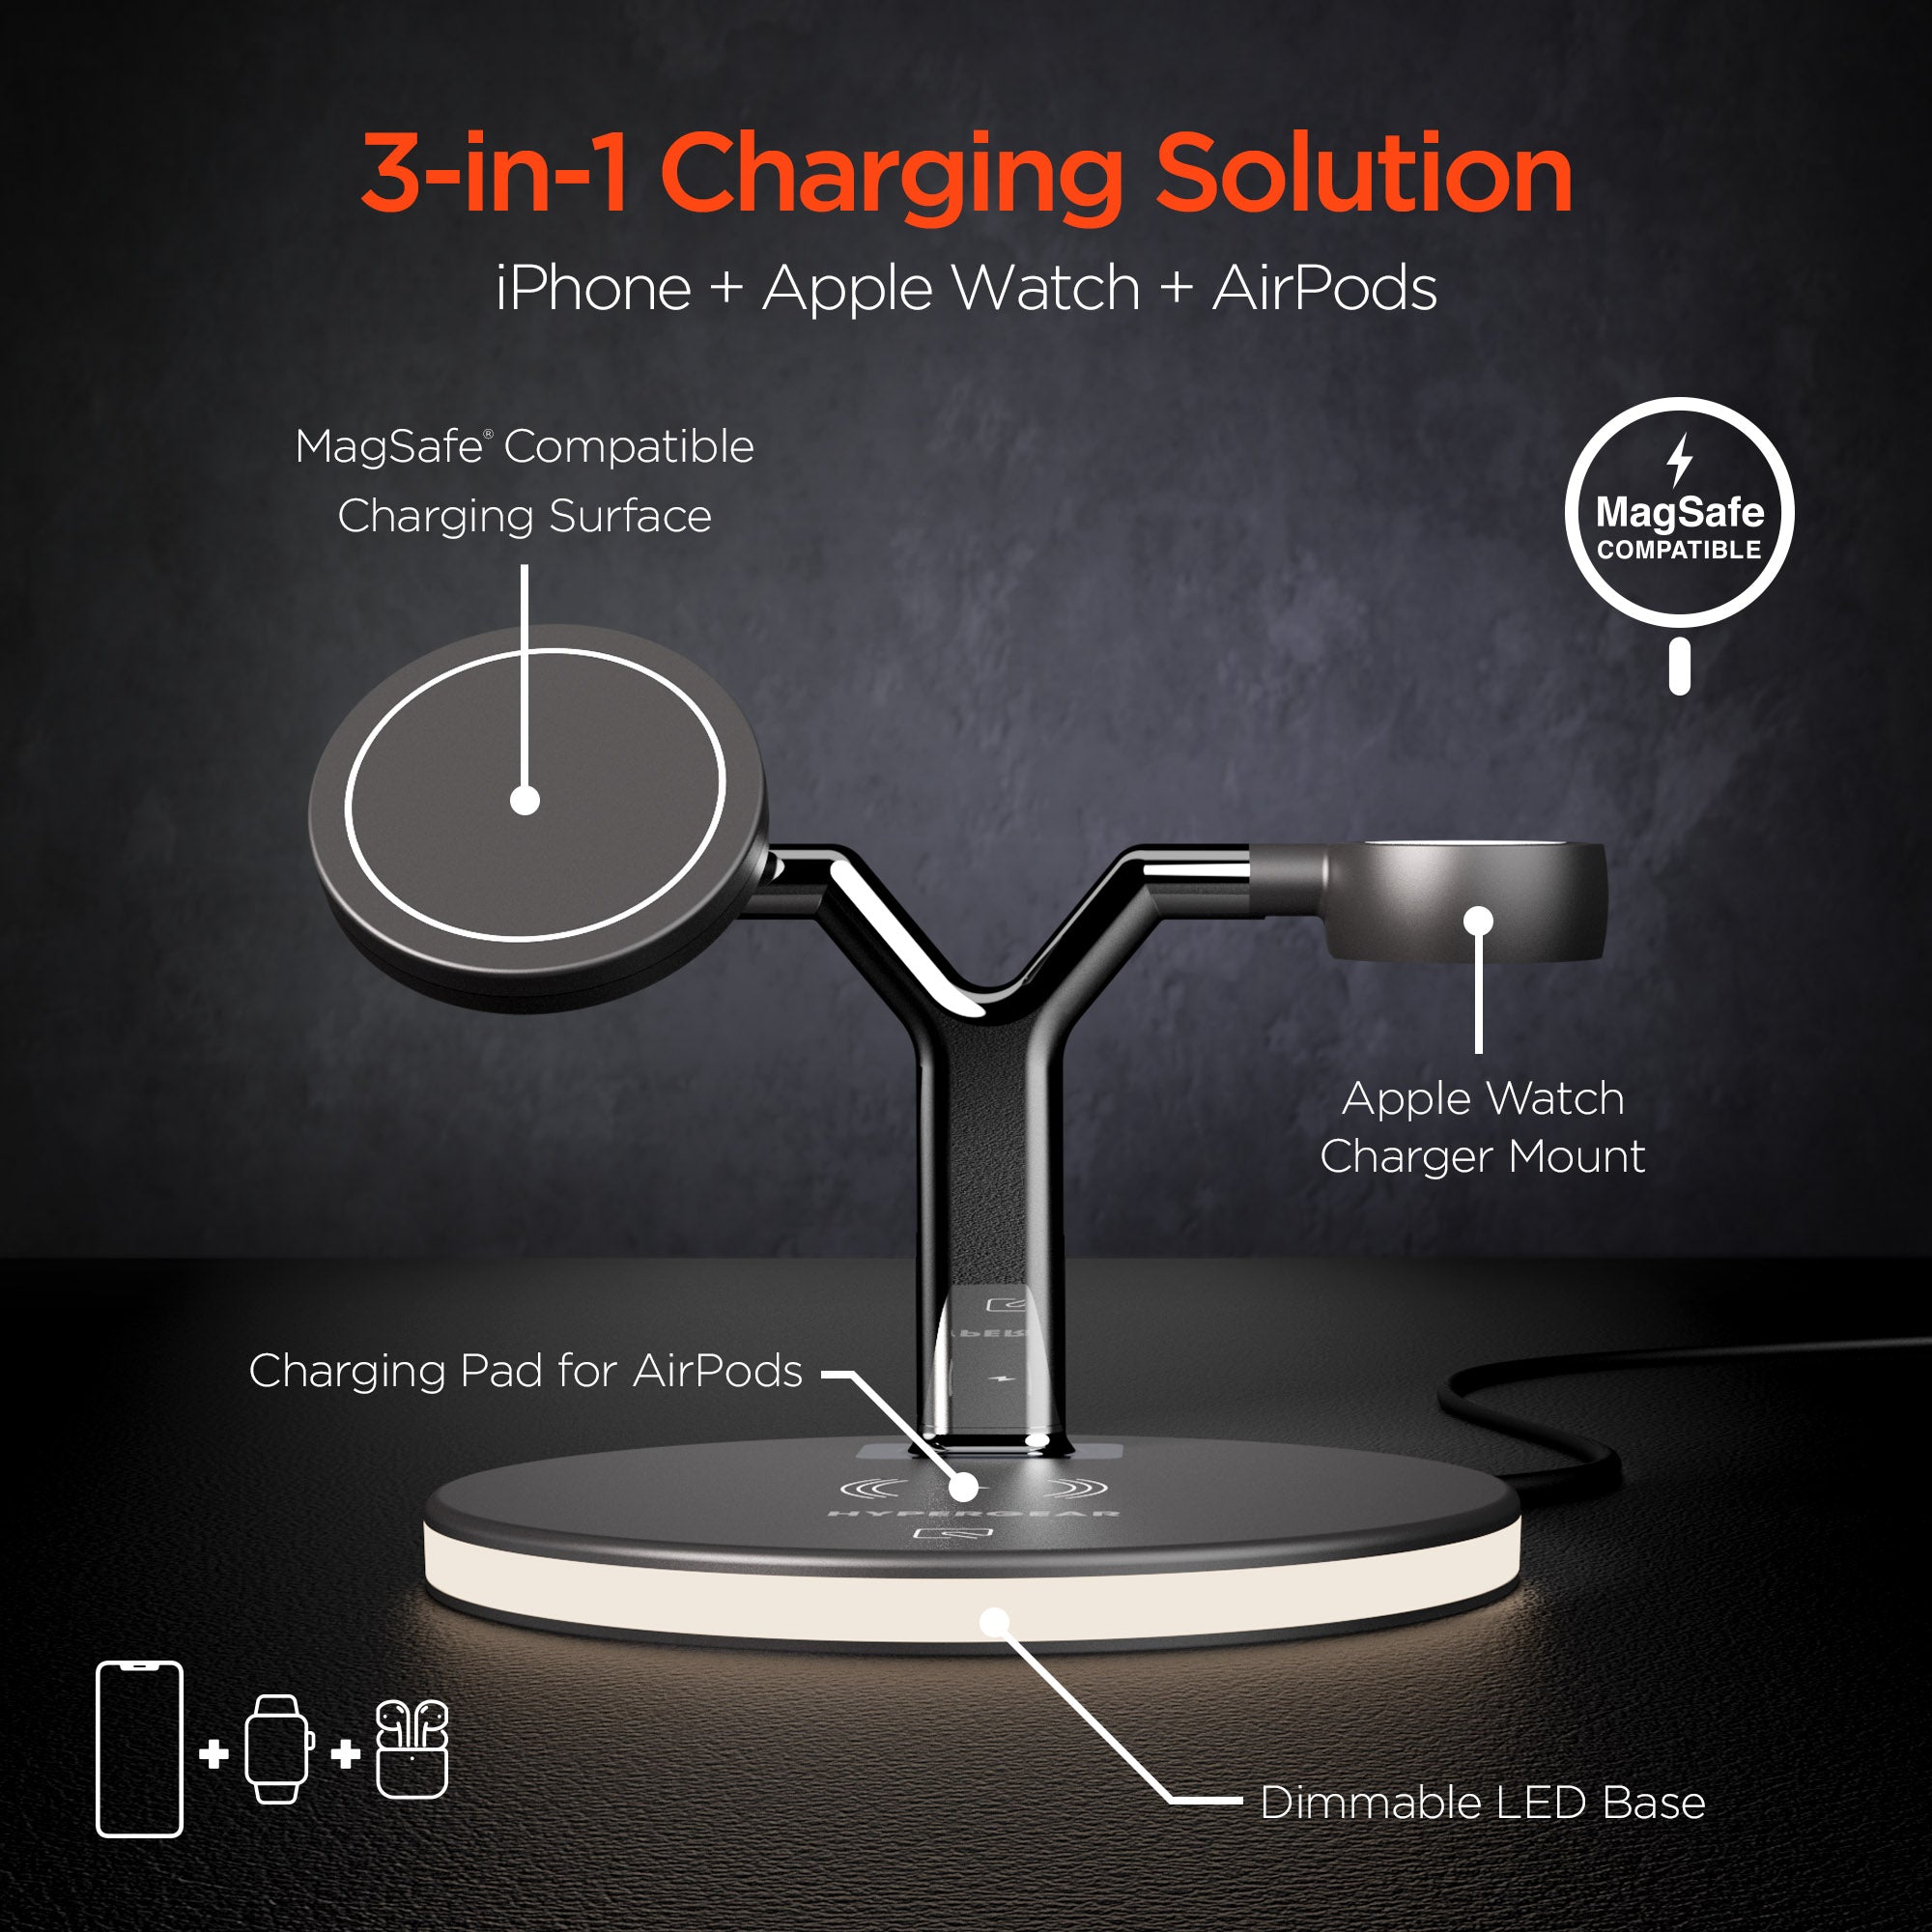 3-in-1 Wireless Charging Pad with Official MagSafe Charging 15W